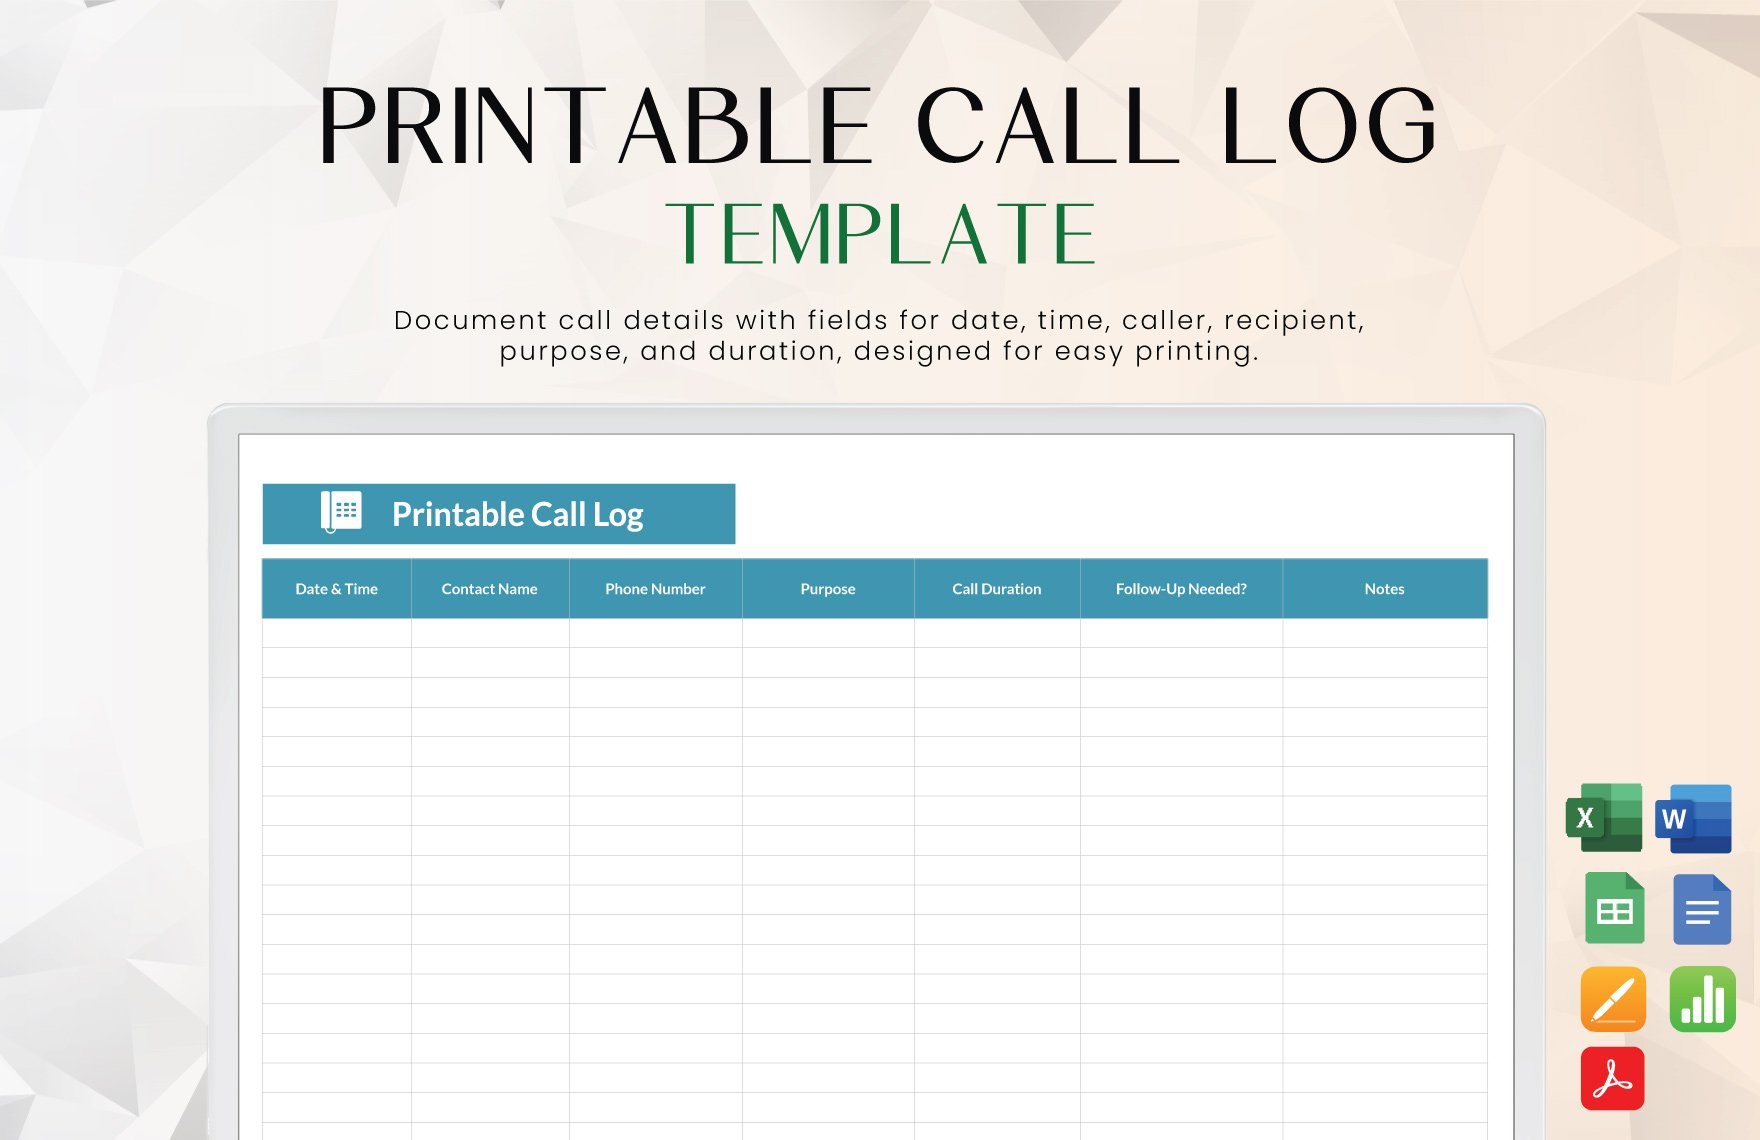 Free Printable Call Log Template in Word, Google Docs, Excel, PDF, Google Sheets, Apple Pages, Apple Numbers